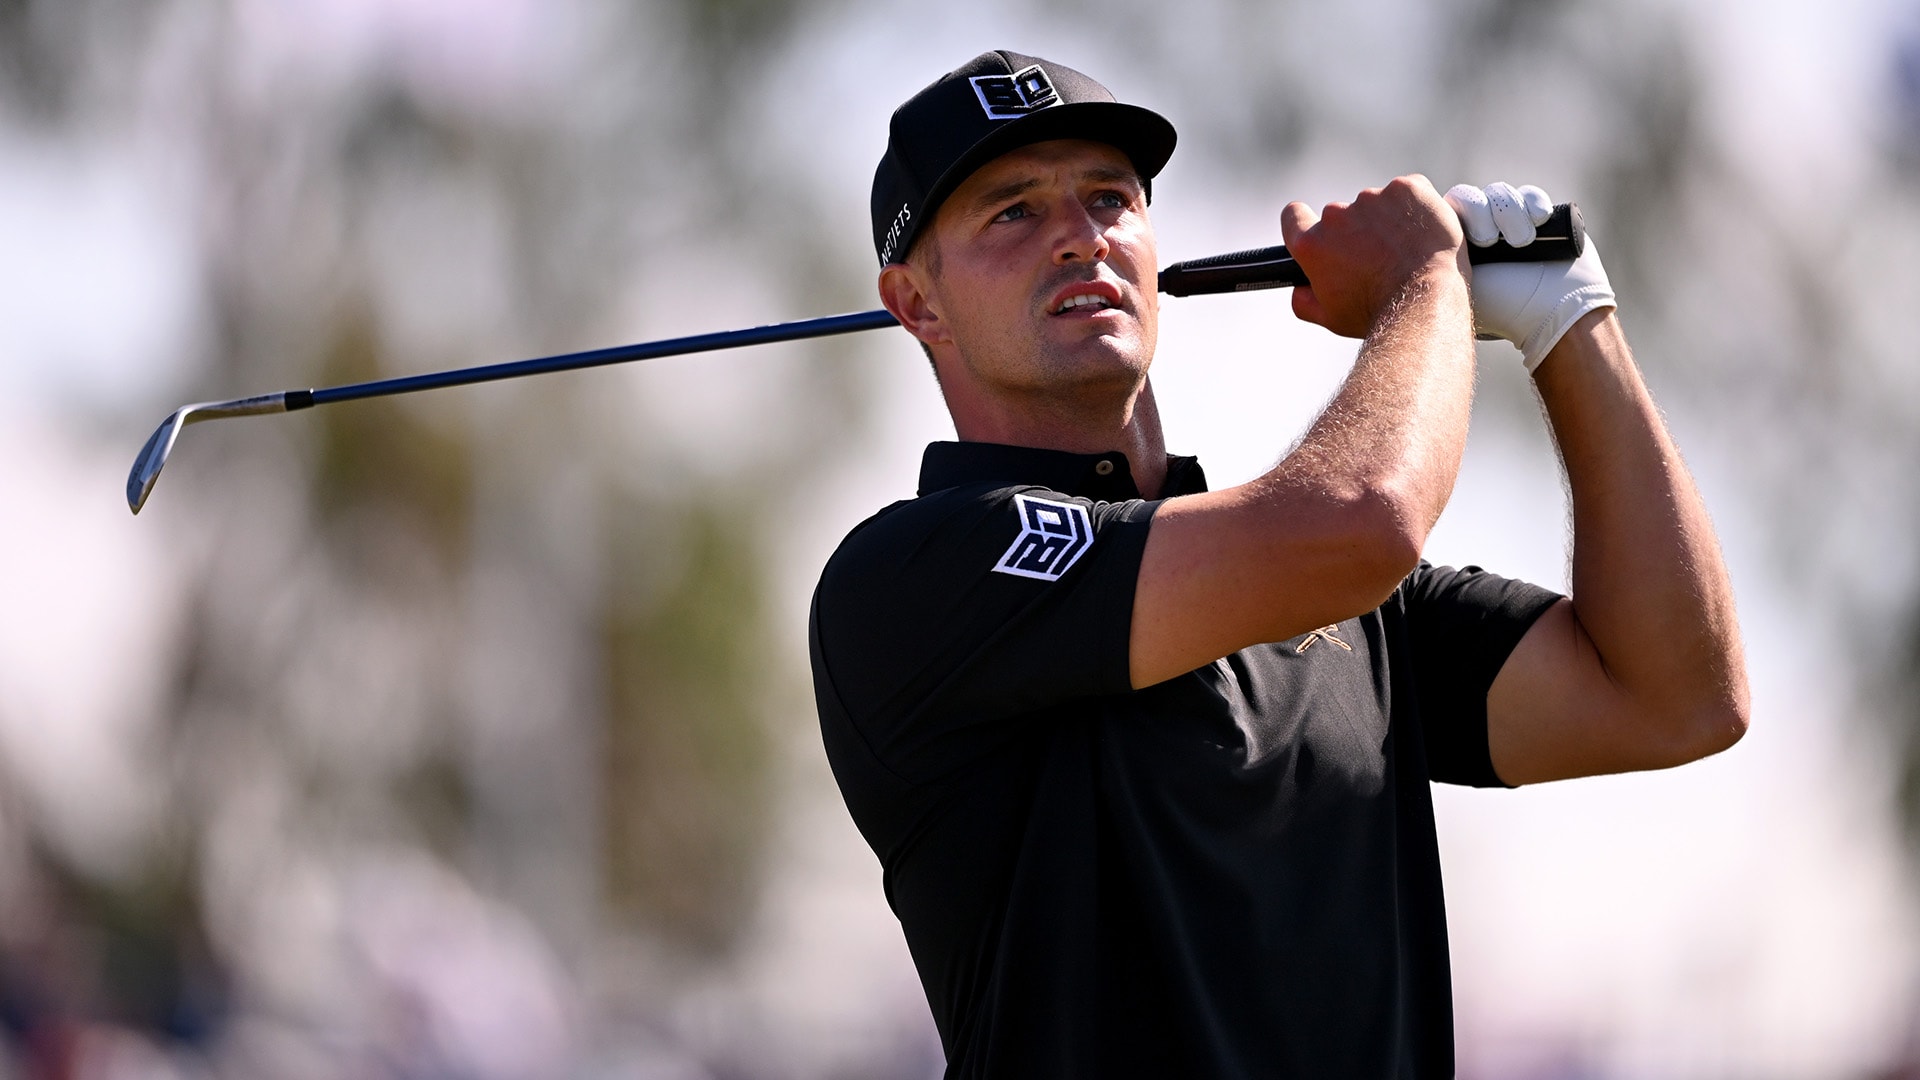 Bryson DeChambeau hoping for Ryder Cup pick: ‘It’d be nice to consider me’